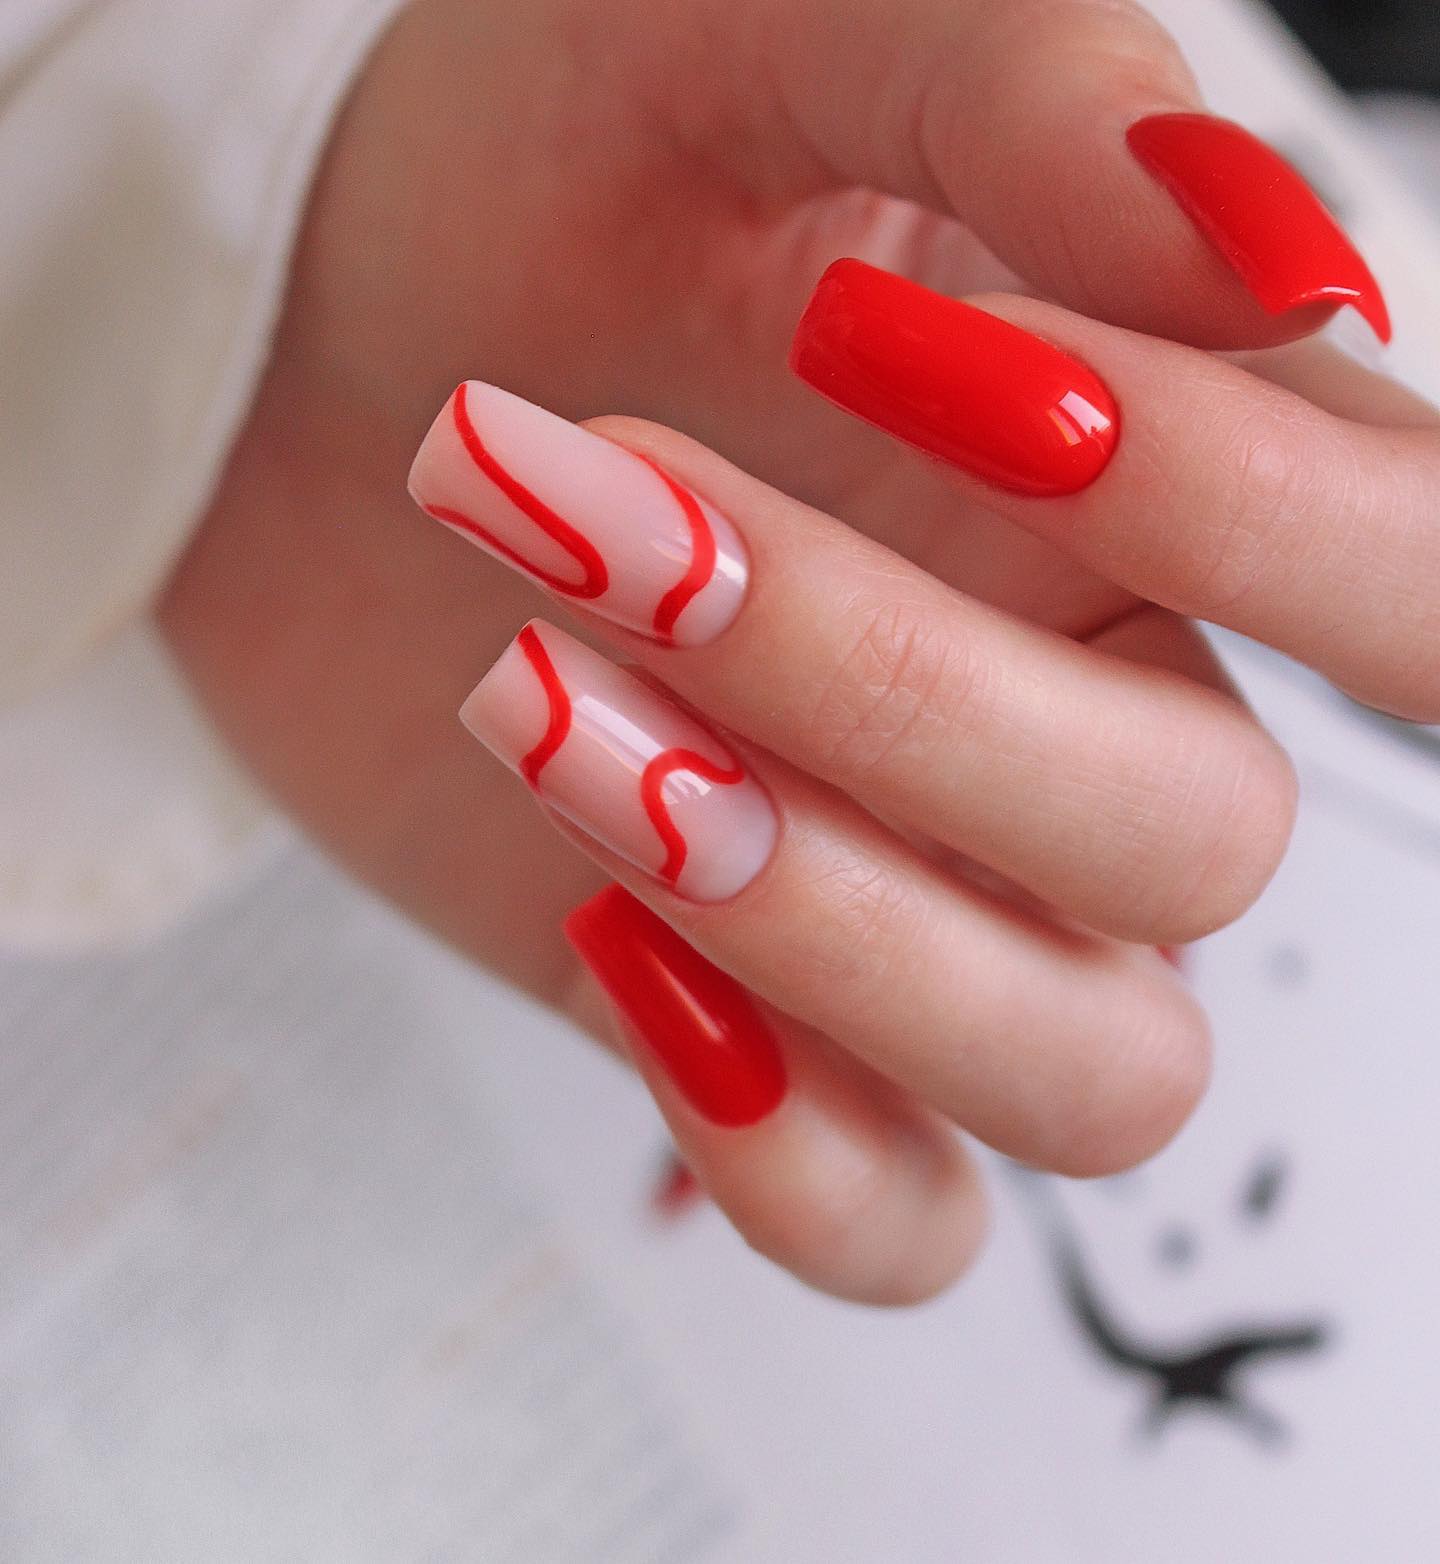 Long Square Red Nails with Red Lines on Nude Polish